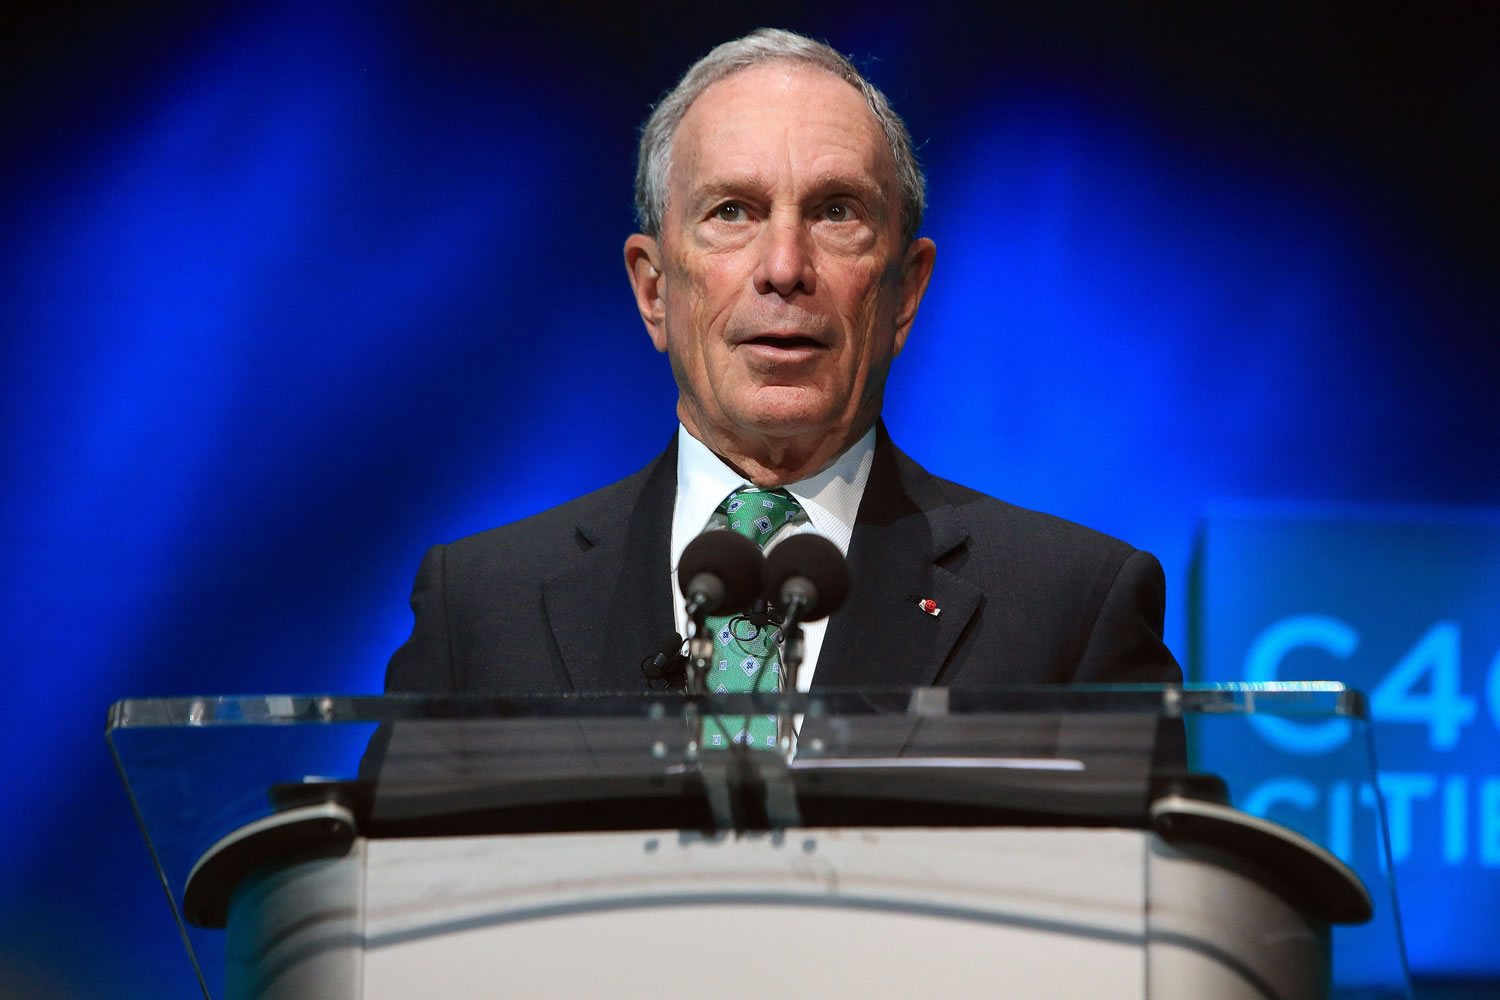 FILE - In this Dec. 3, 2015, file photo, former New York Mayor Michael Bloomberg speaks during the C40 cities awards ceremony, in Paris. Bloomberg is taking some early steps toward launching a potential independent campaign for president. That's according to three people familiar with the billionaire media executive's plans. They spoke on condition of anonymity because they weren't authorized to speak publicly for Bloomberg.